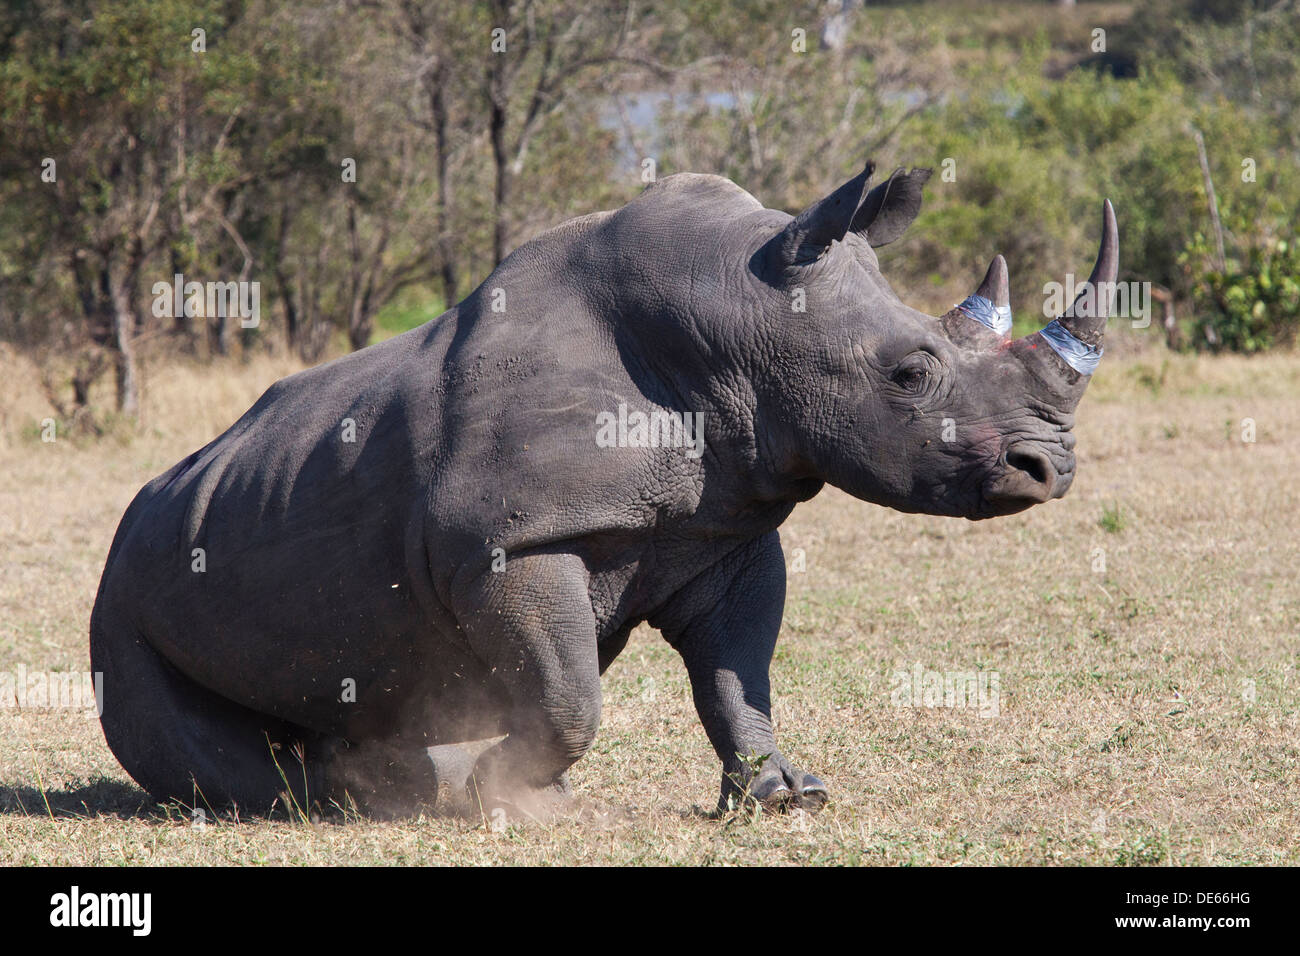 A rhino standing up after having its horn treated with indelible dye and  toxin as a deterrent to poachers Stock Photo - Alamy